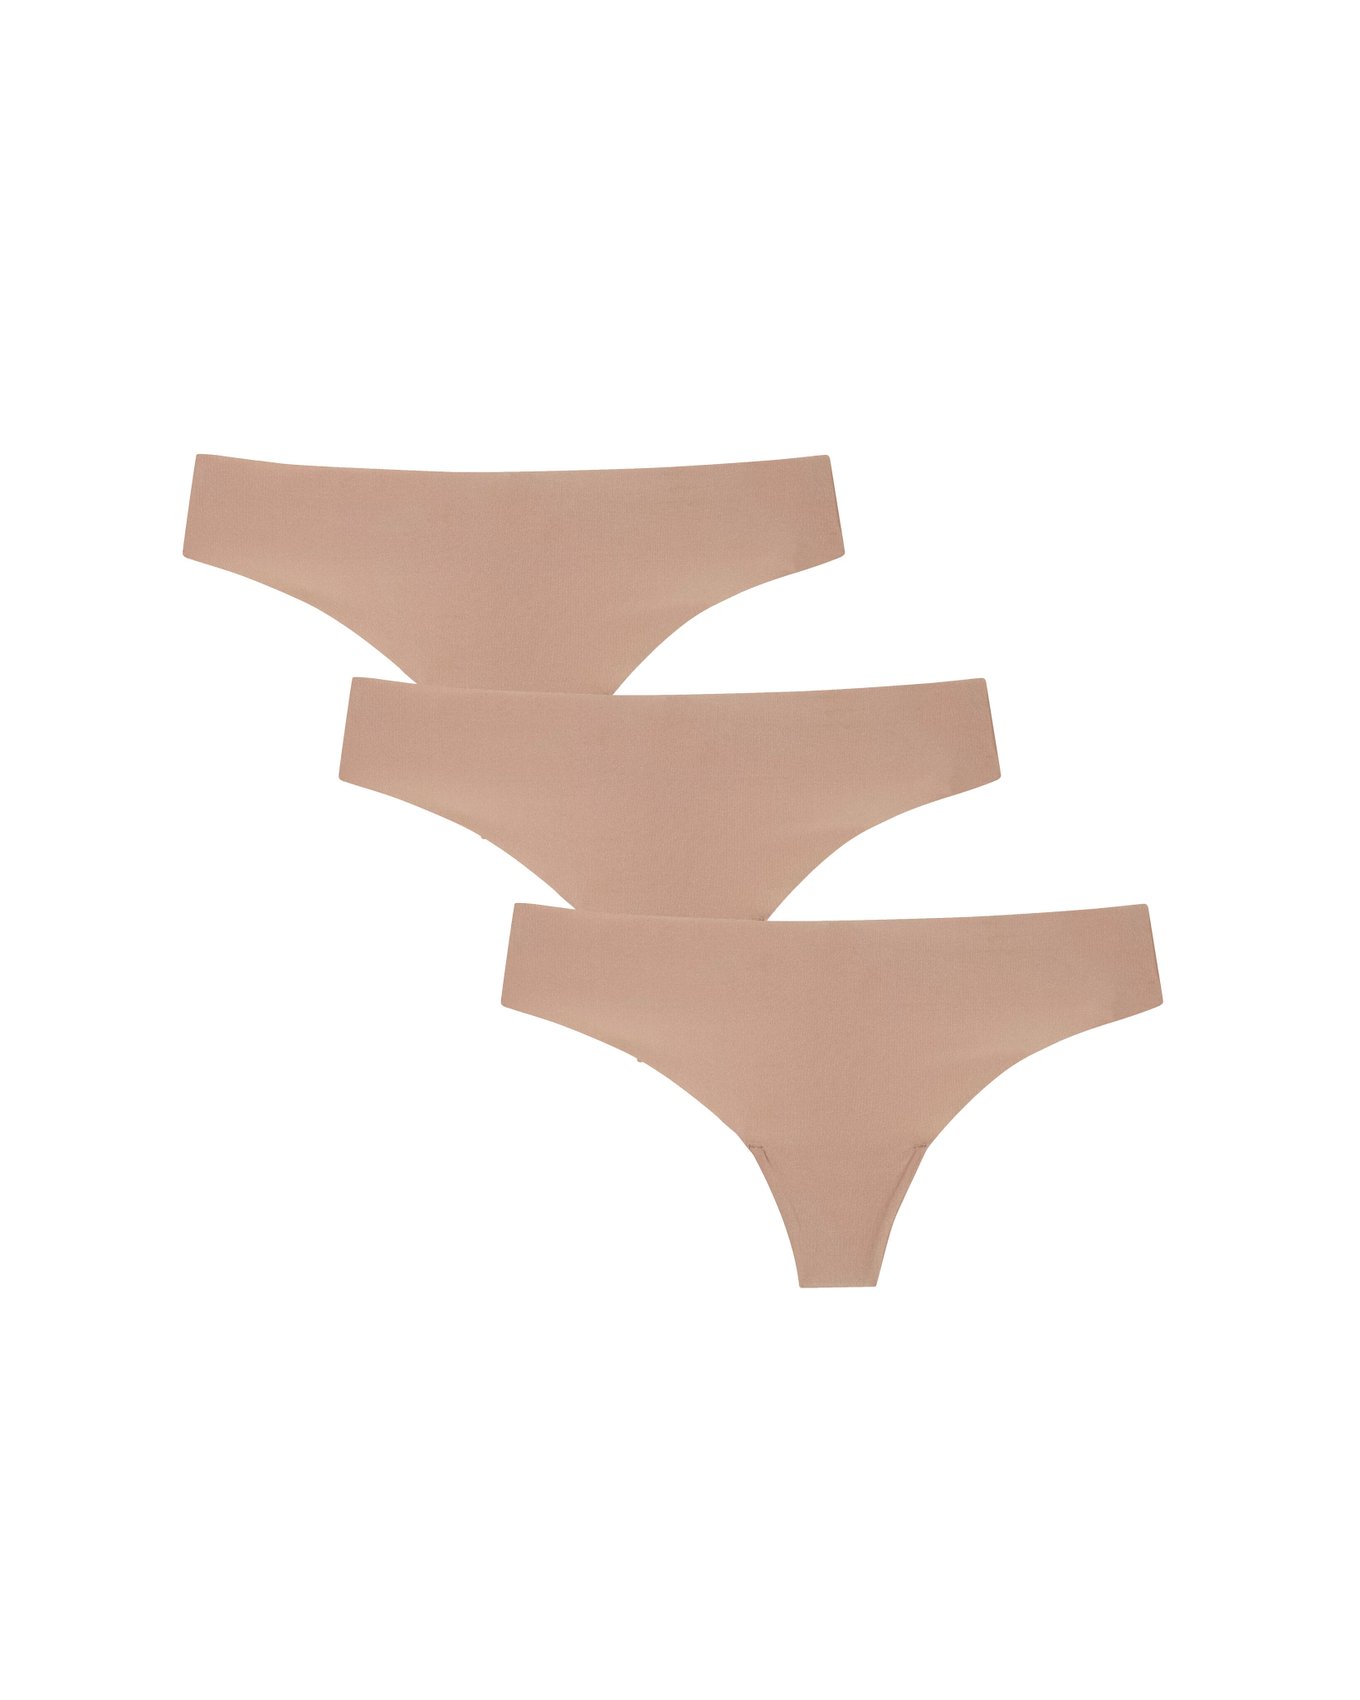 Women's Invisibles Seamless Underwear String Bikini Panties No Show Low  Rise Soft Breathable Hipster Panty Underpants Beige at  Women's  Clothing store